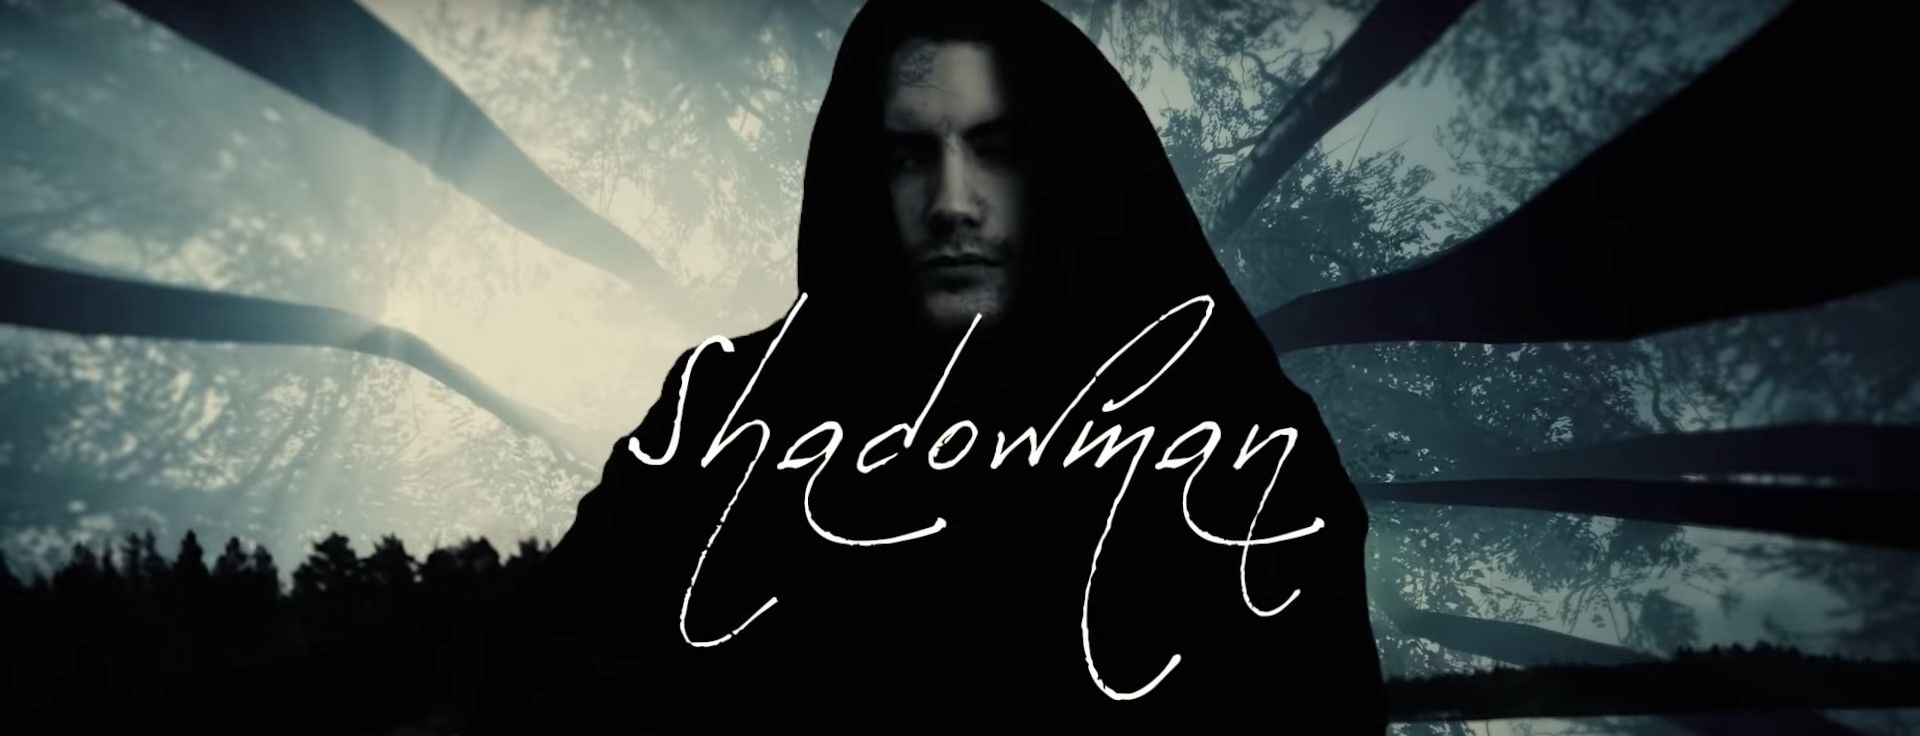 One Desire - Shadowman (Official)